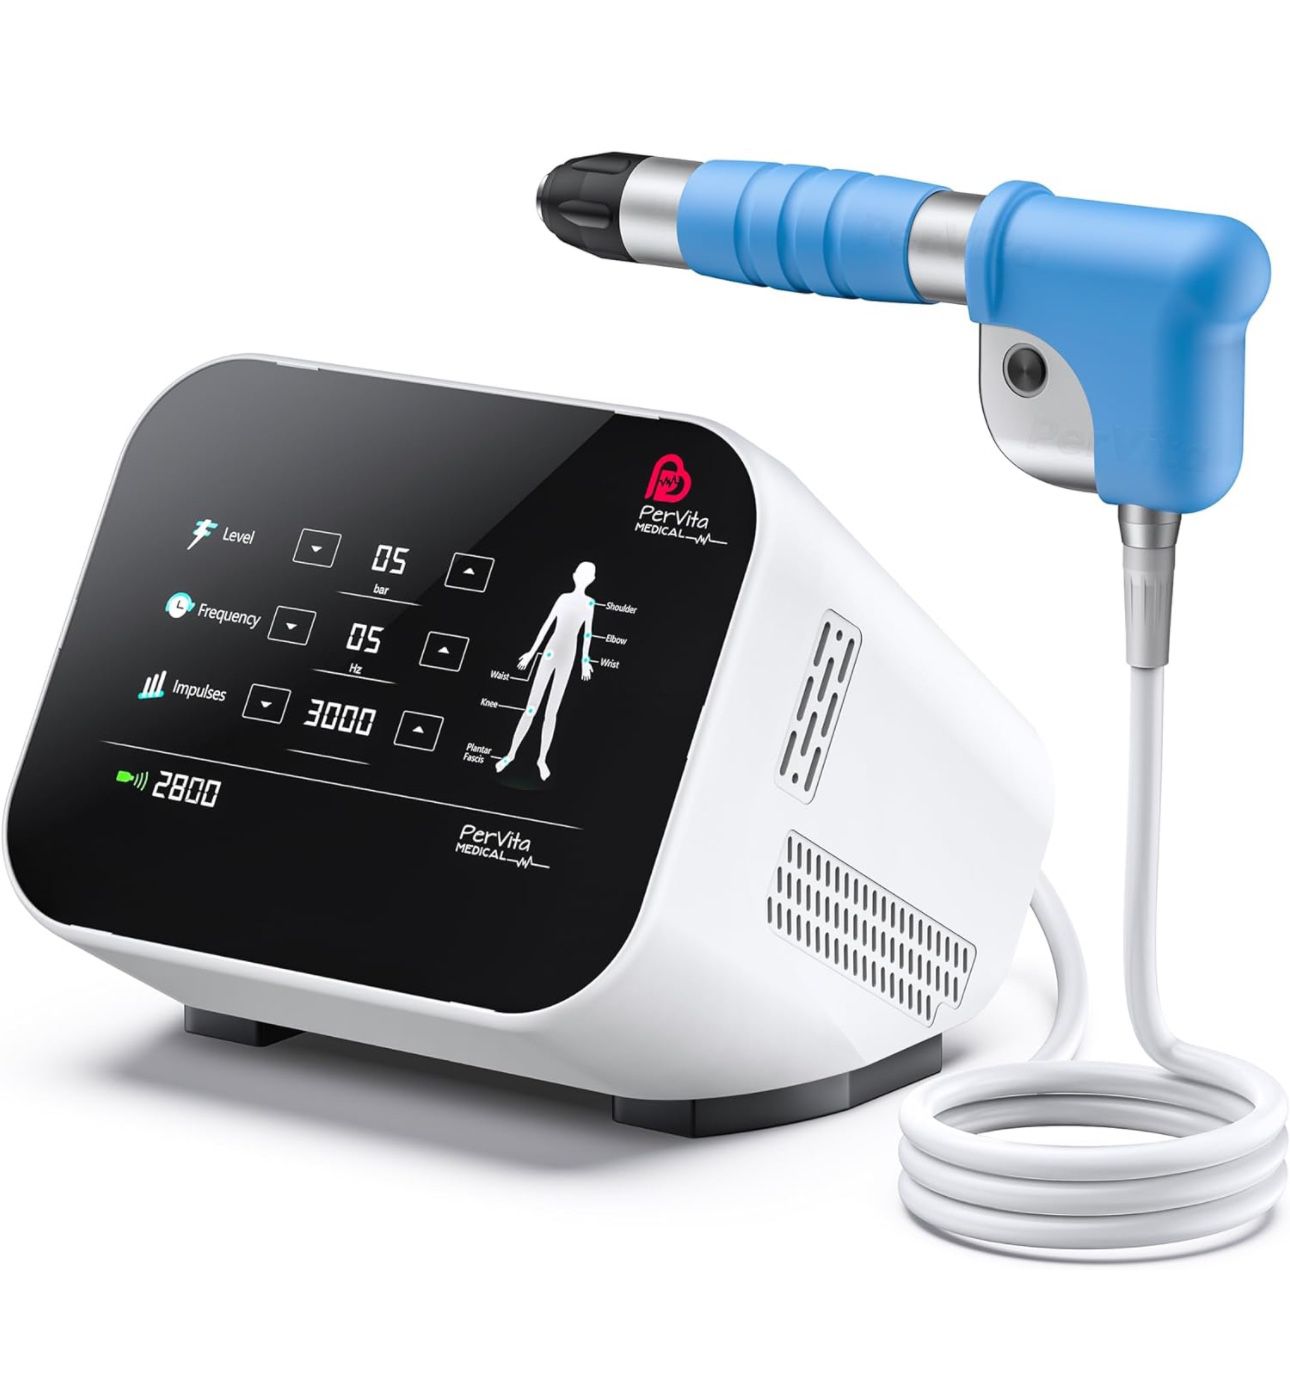 Shockwave Therapy Machine Extracorporeal Shock Wave Therapy Machine Joint and Muscle Pain Relief On-The-Go Painless Non-Invasive No Side Effects PSP10